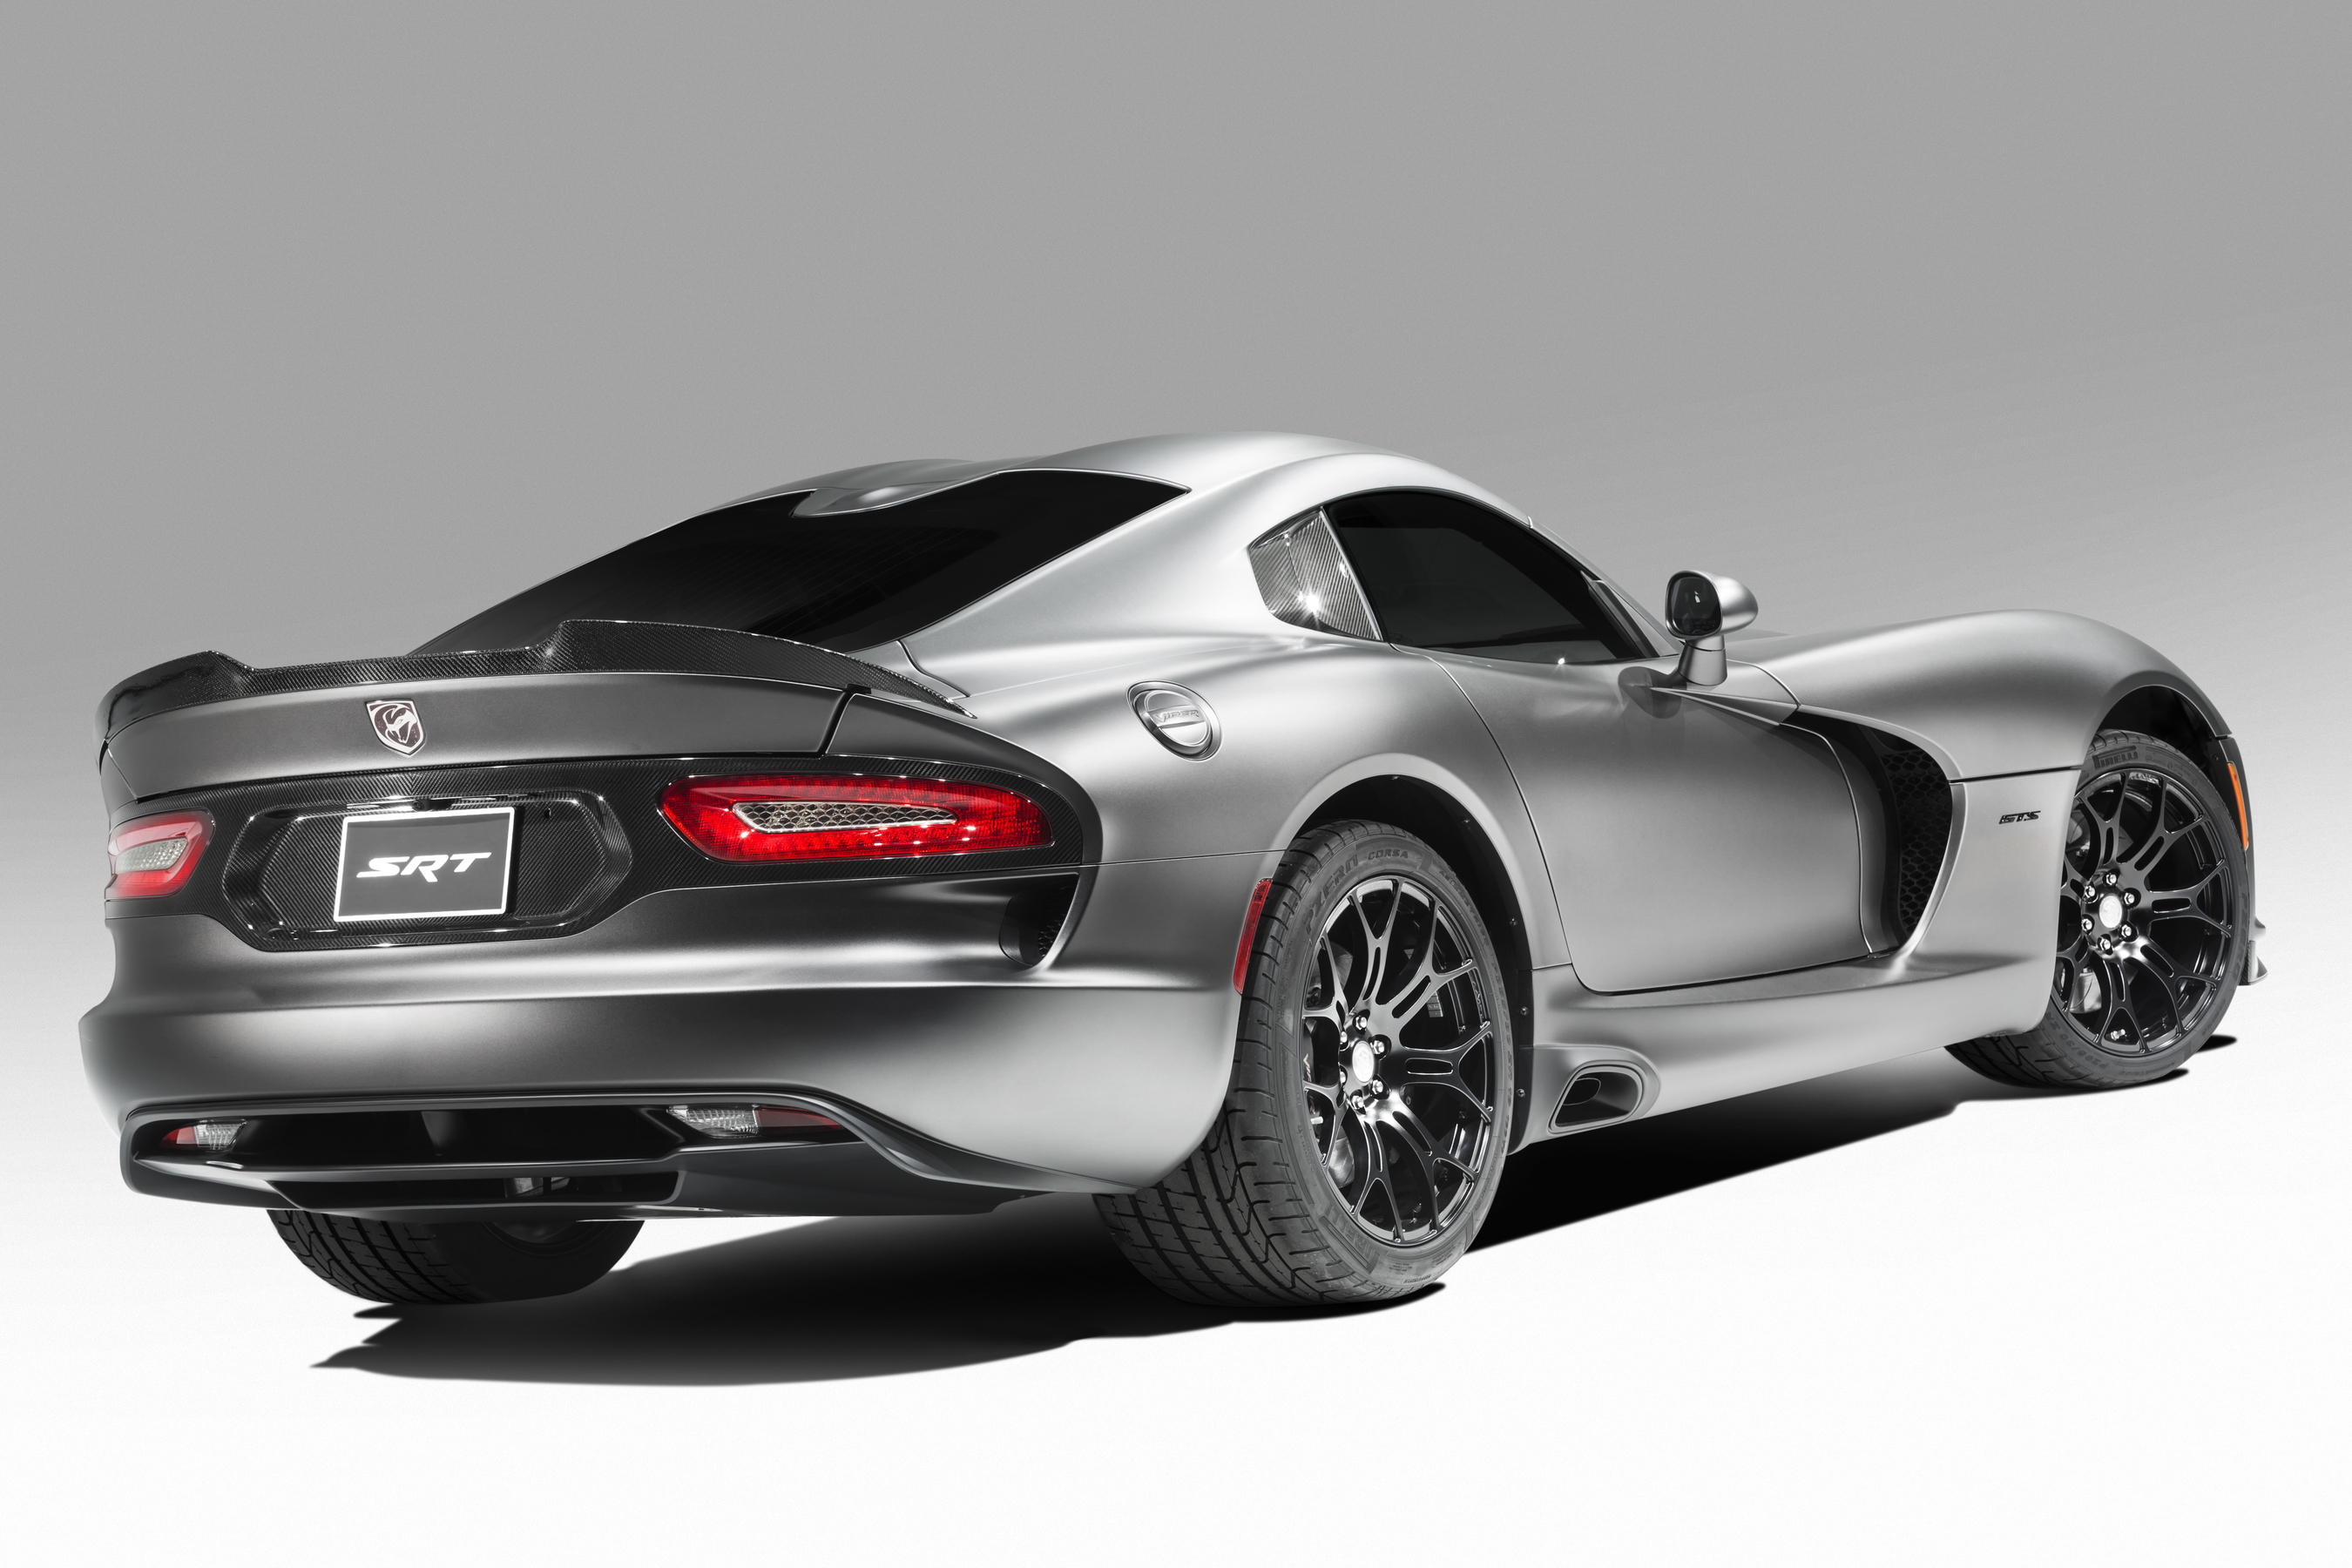 Chrysler Group's SRT (Street and Racing Technology) Brand Debuts New Time Attack Group on Anodized Carbon Special Edition Viper (PRNewsFoto/Chrysler Group LLC)